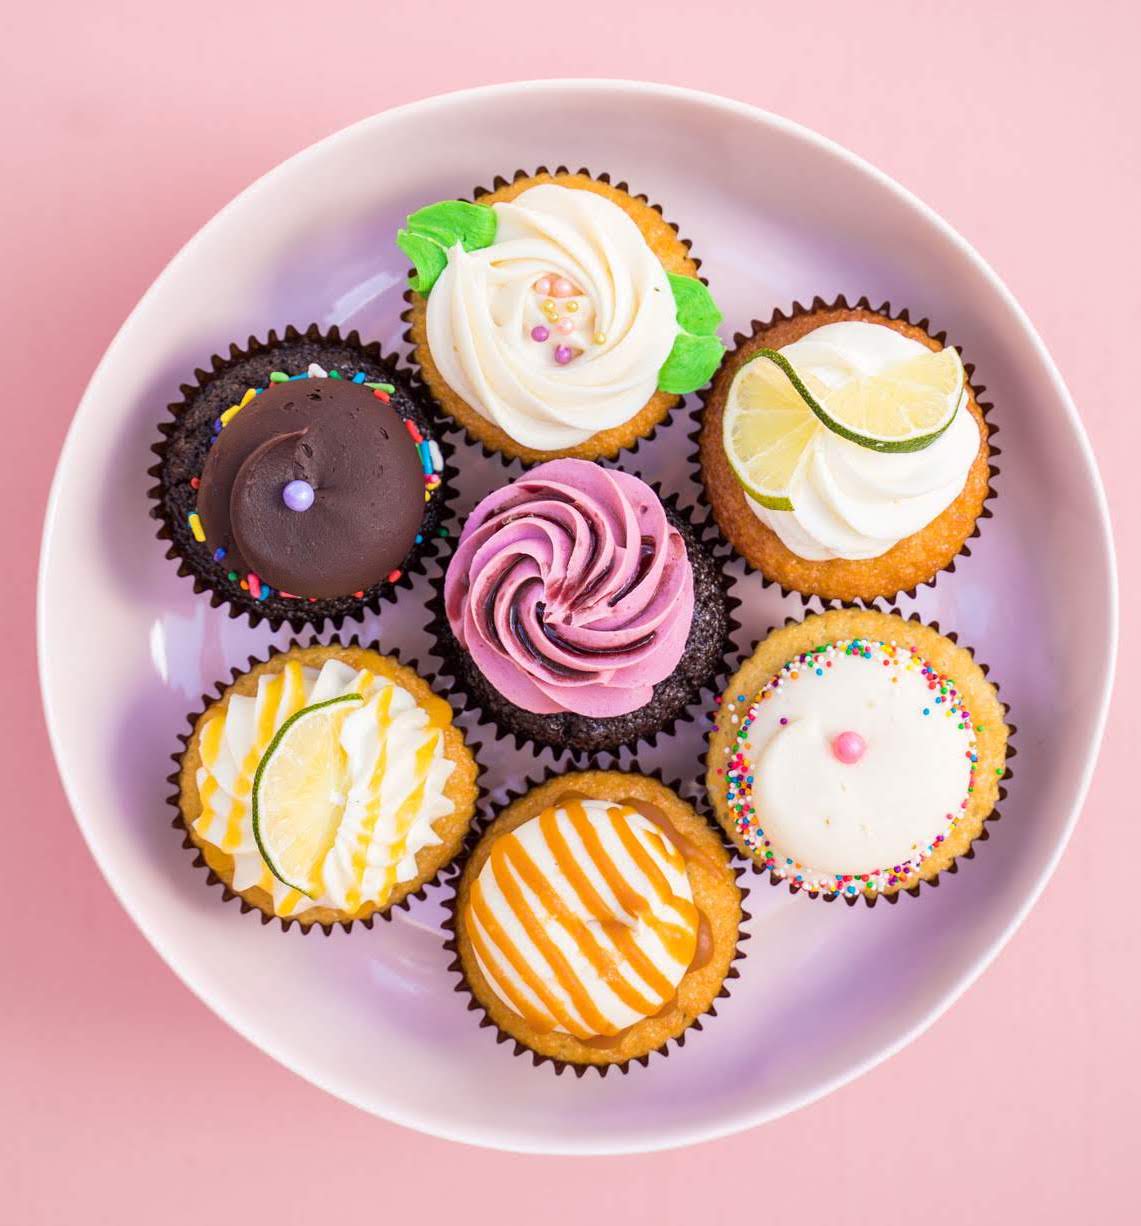 Colony Square To Get California-Based Cupcake Shop - Photo 2